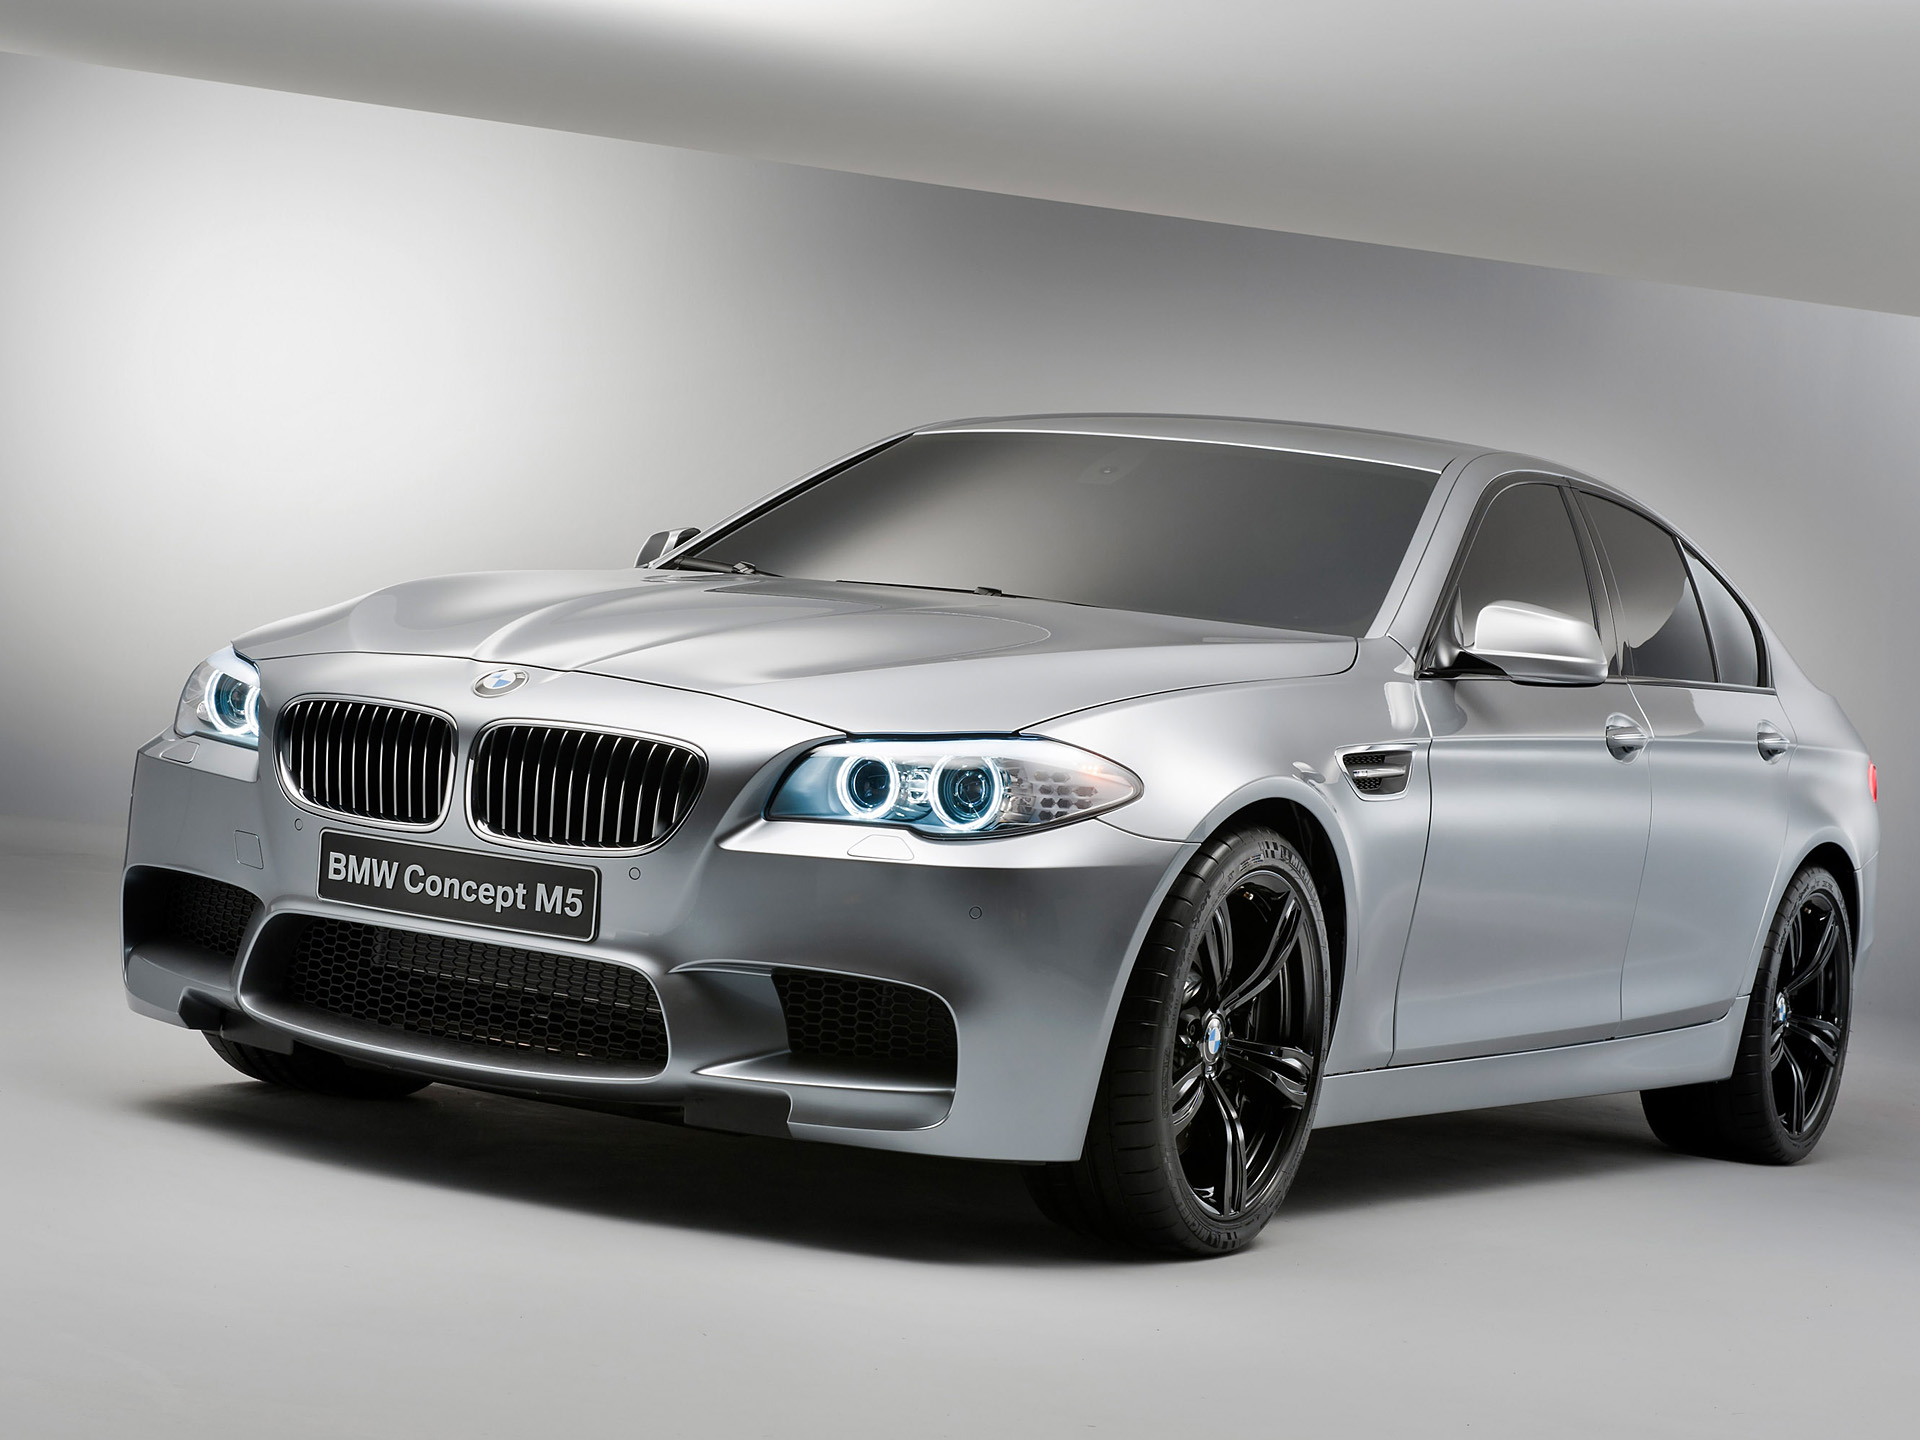 Best 2012 Bmw Concept M5 Background for mobile